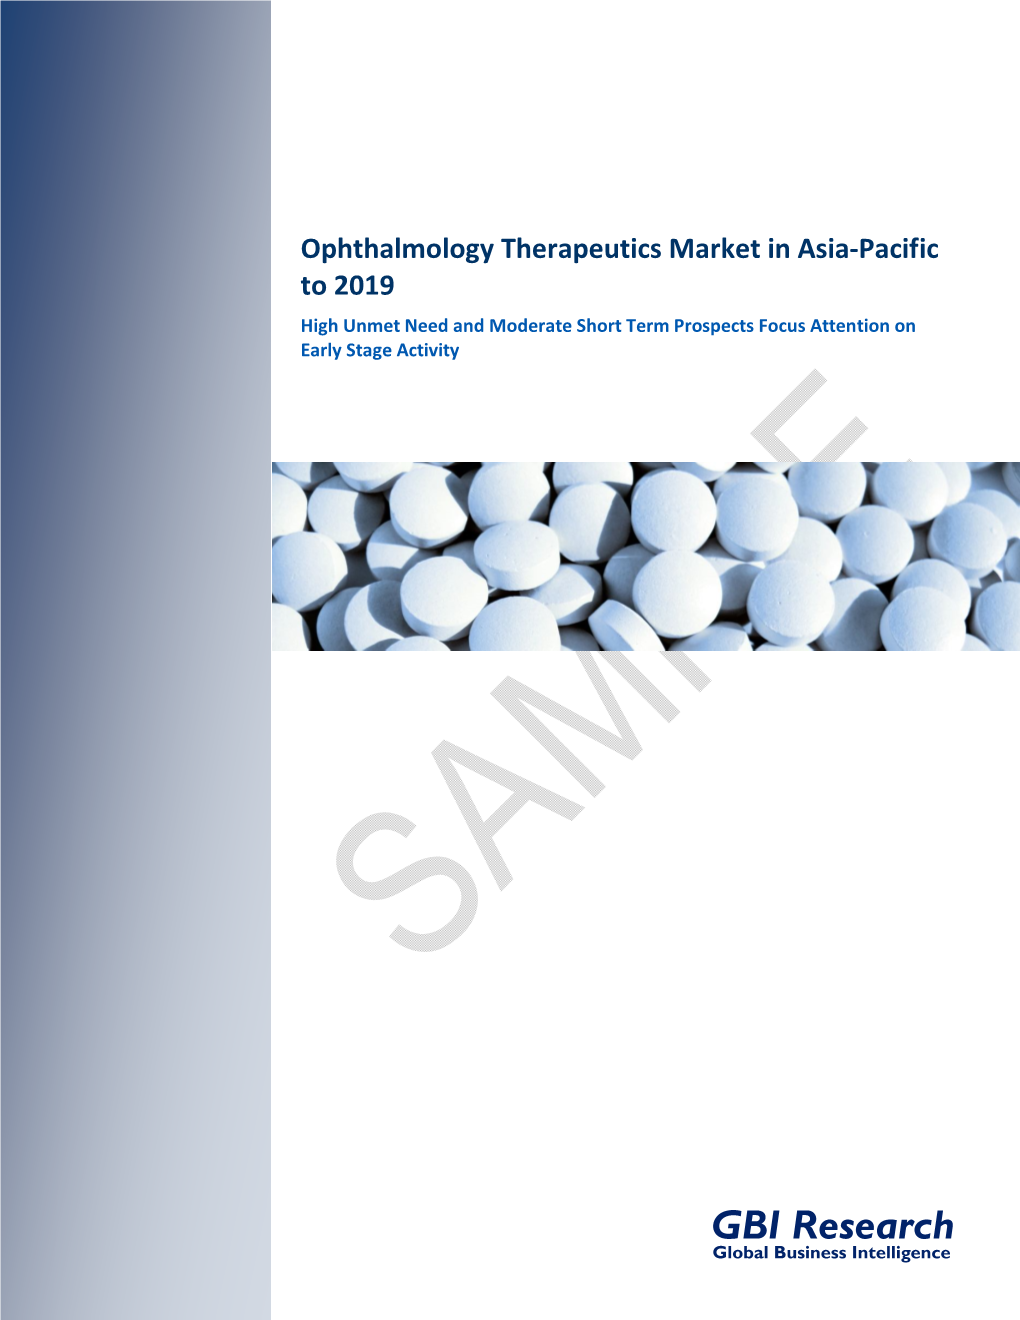 Ophthalmology Therapeutics Market in Asia-Pacific to 2019 High Unmet Need and Moderate Short Term Prospects Focus Attention on Early Stage Activity